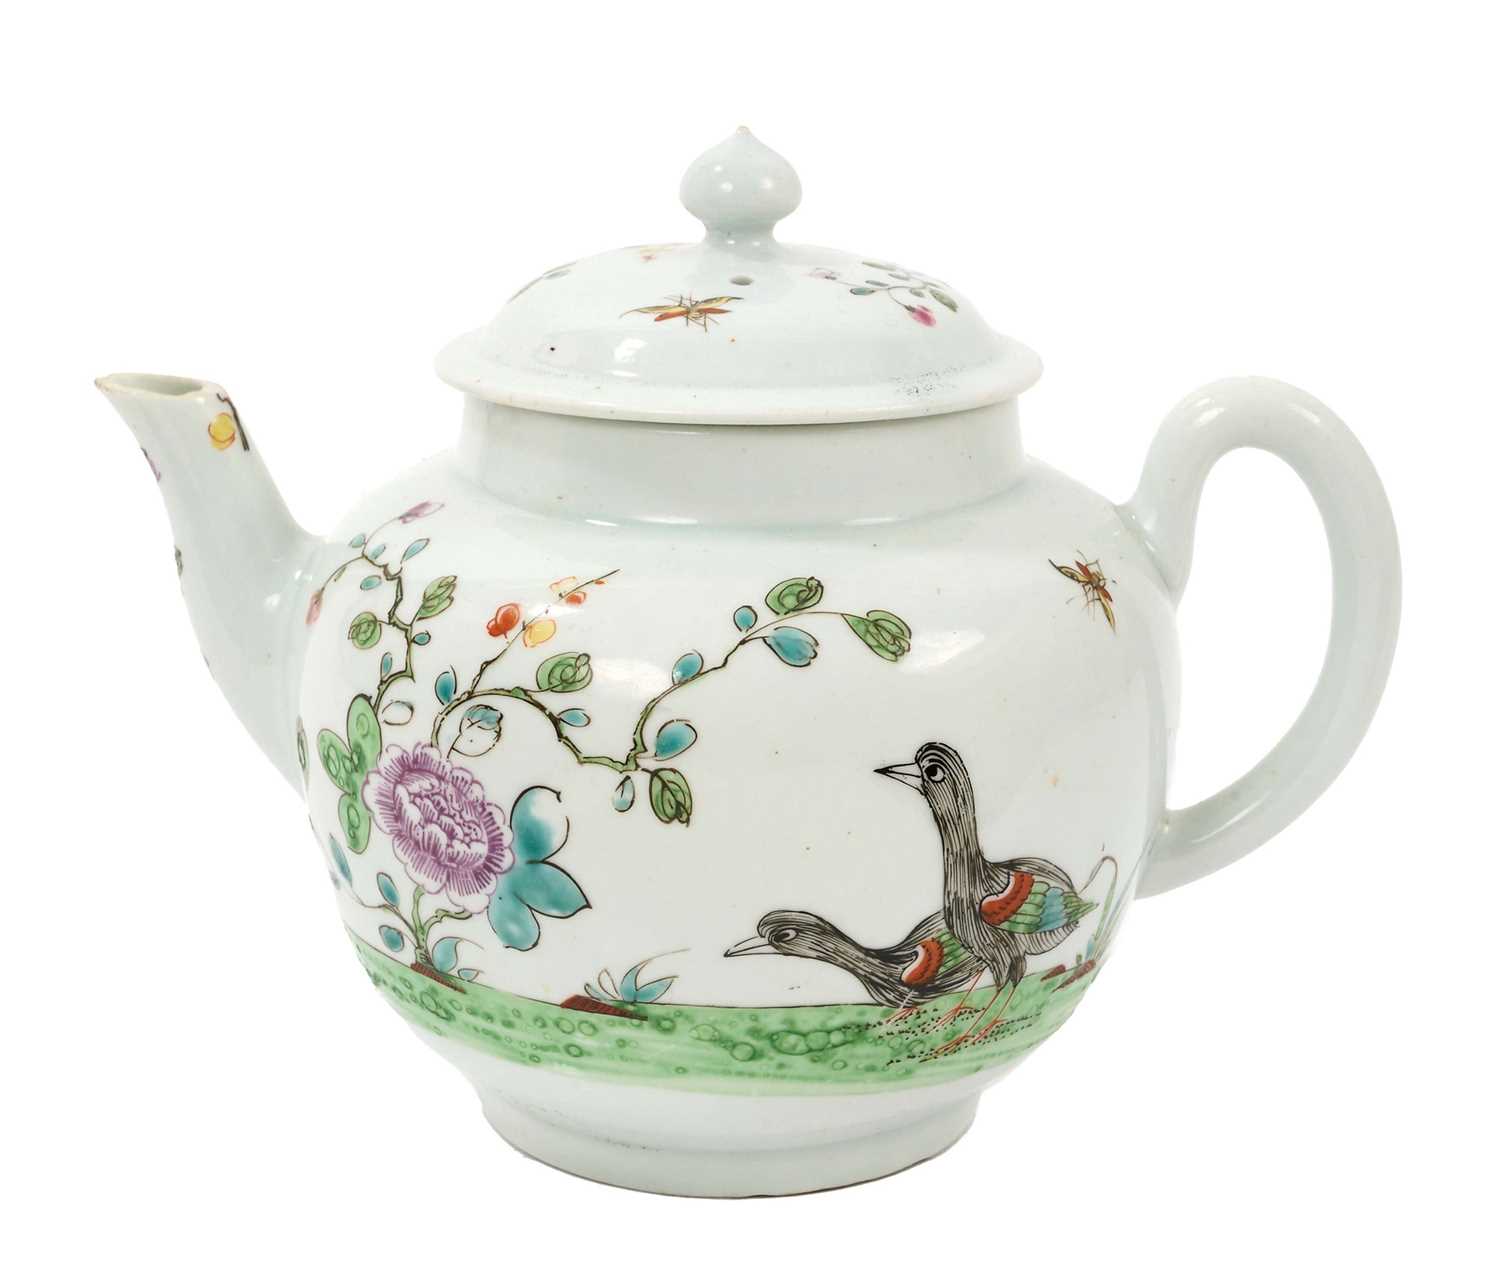 Rare Worcester globular teapot and cover, painted in Chinese famille rose palette with two geese in